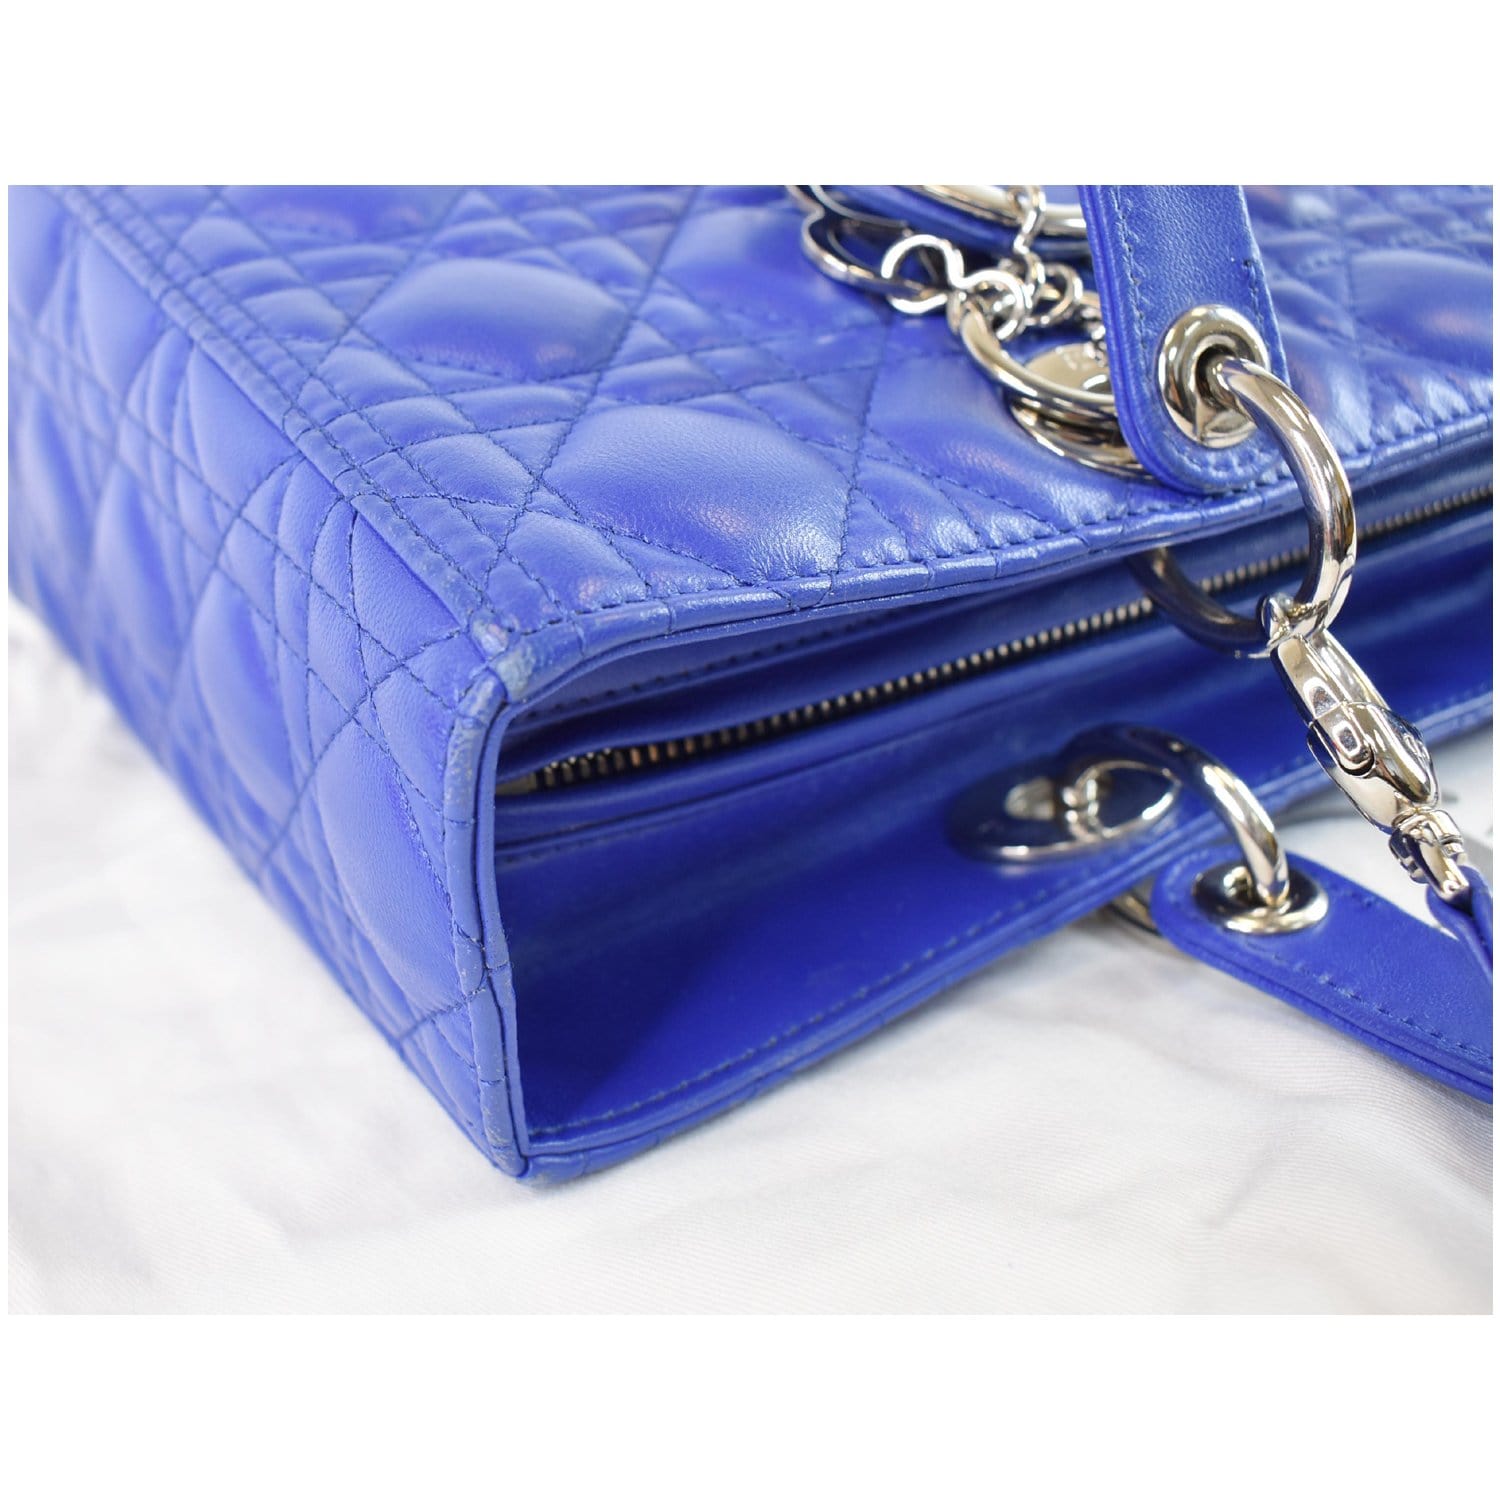 Lady dior leather clutch bag Dior Blue in Leather - 35159643